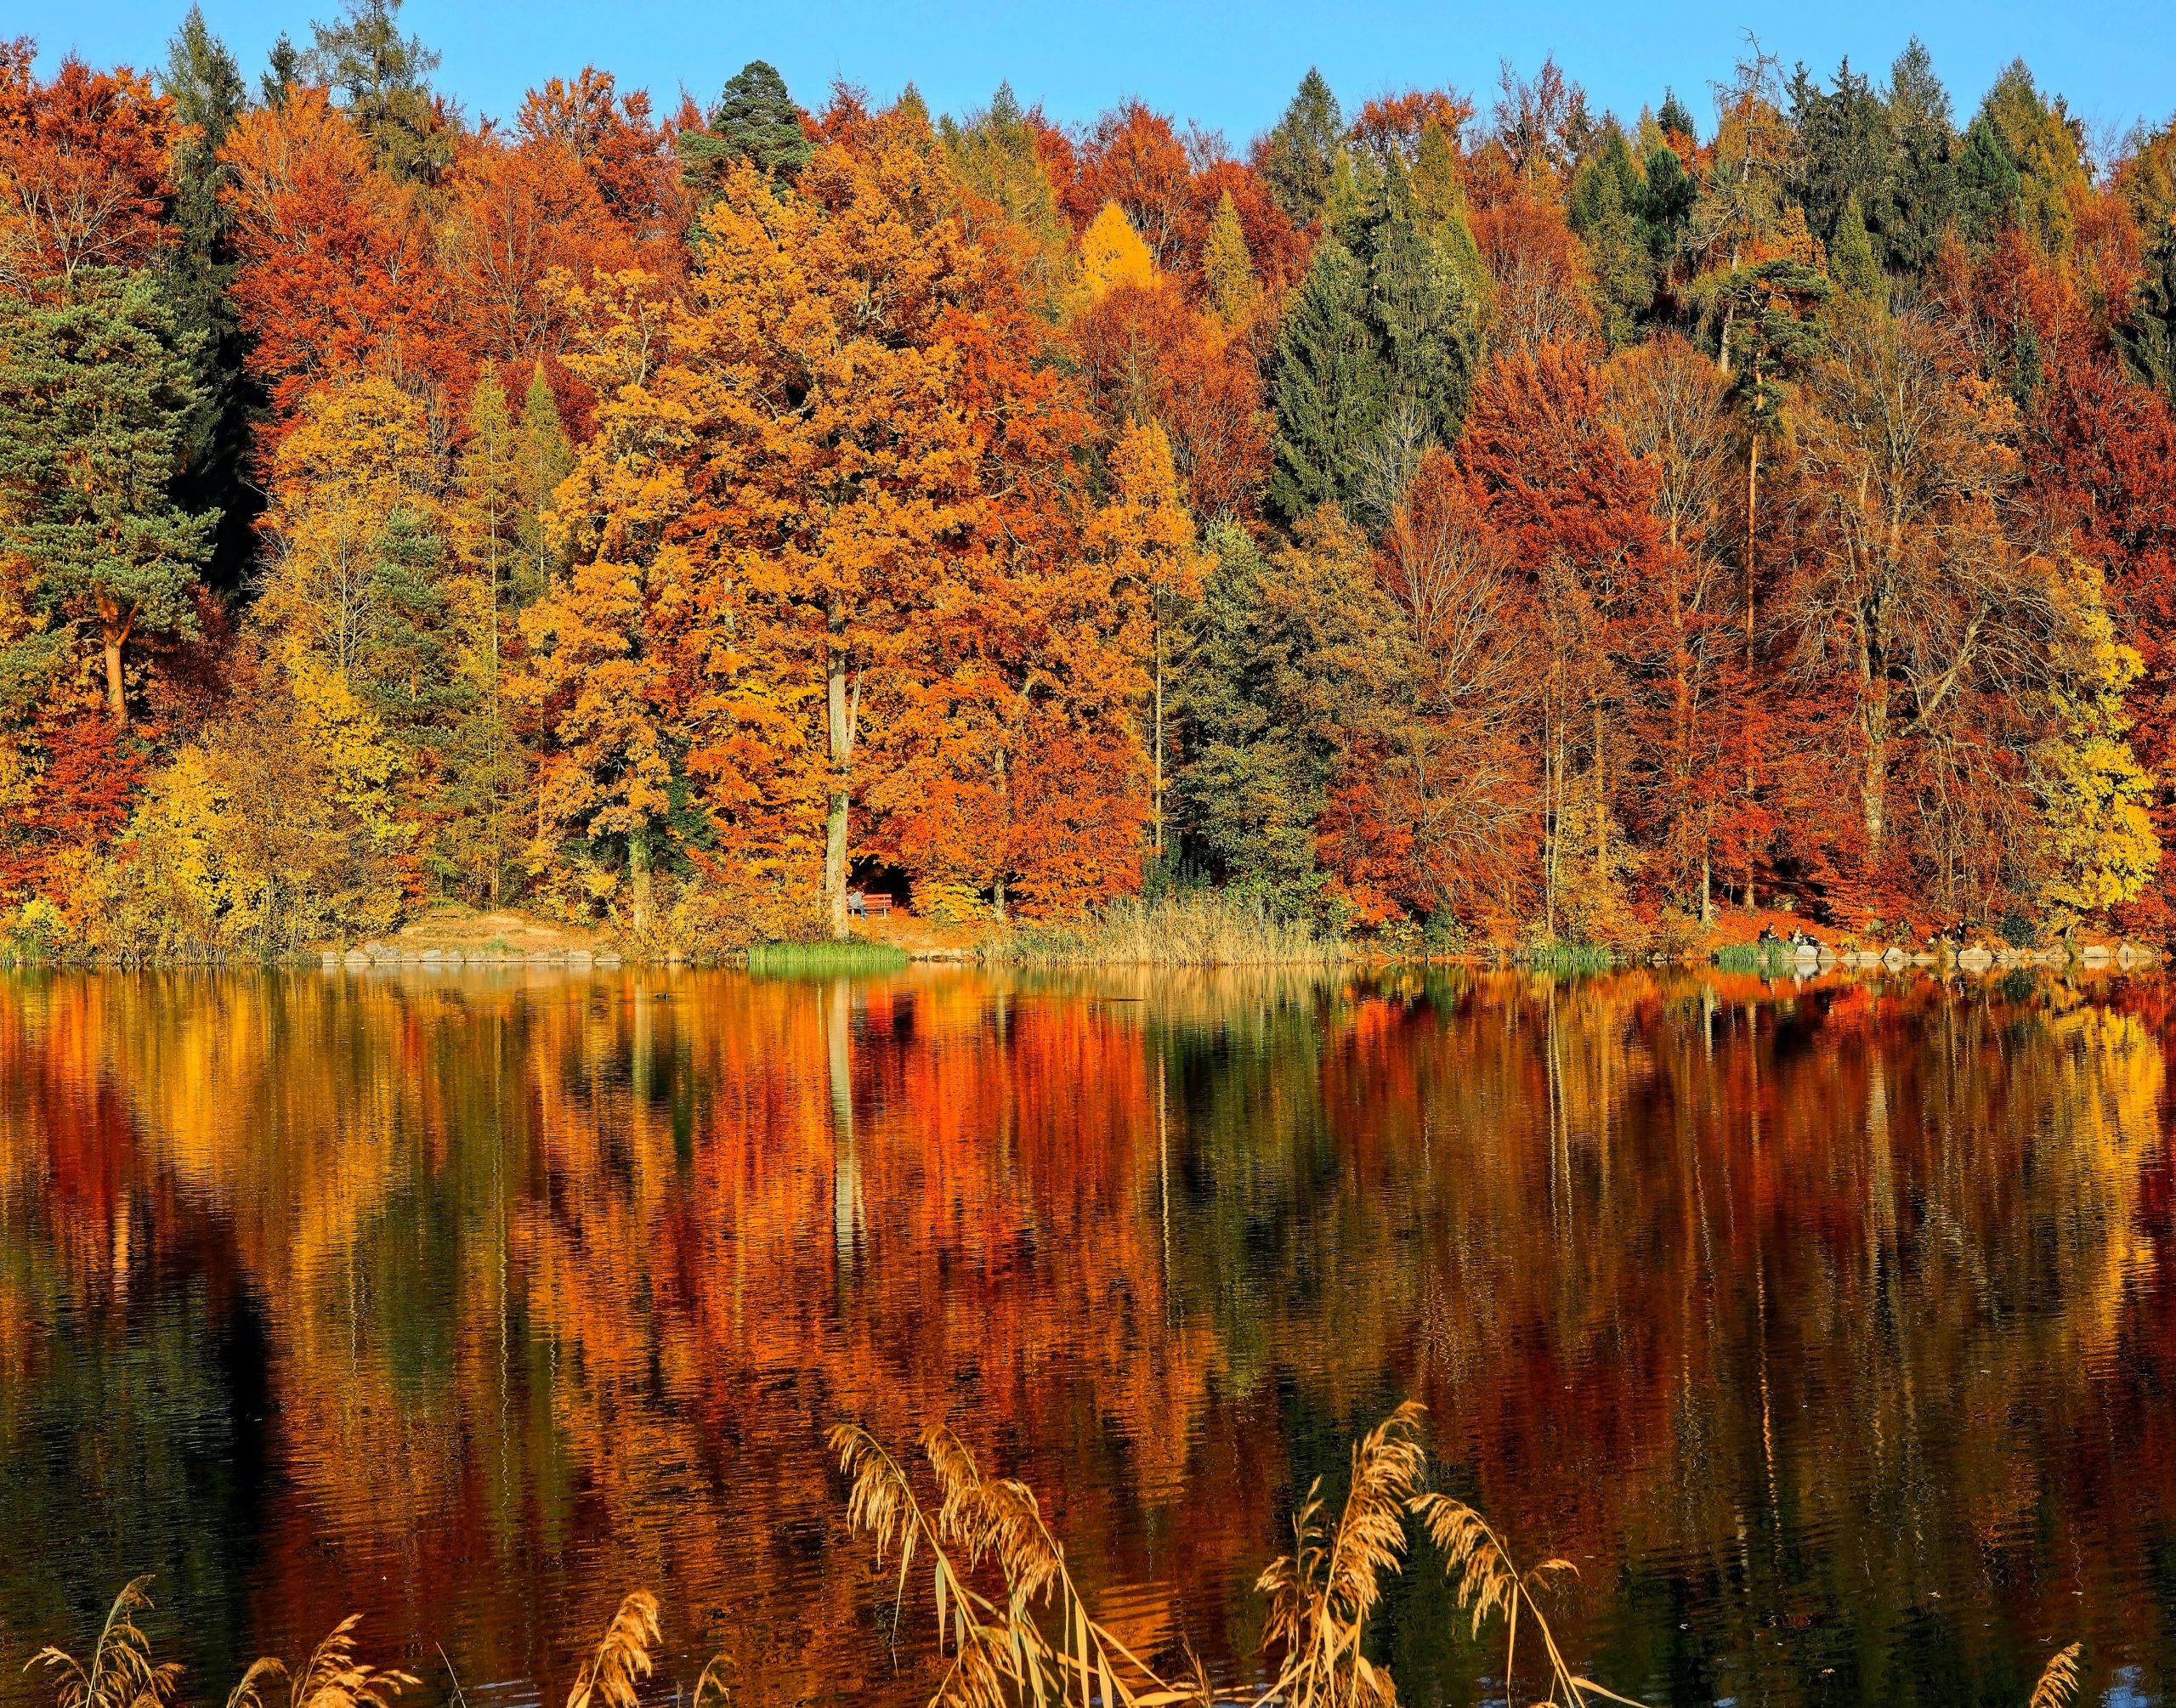 Fall-coloured leaves by a still lake